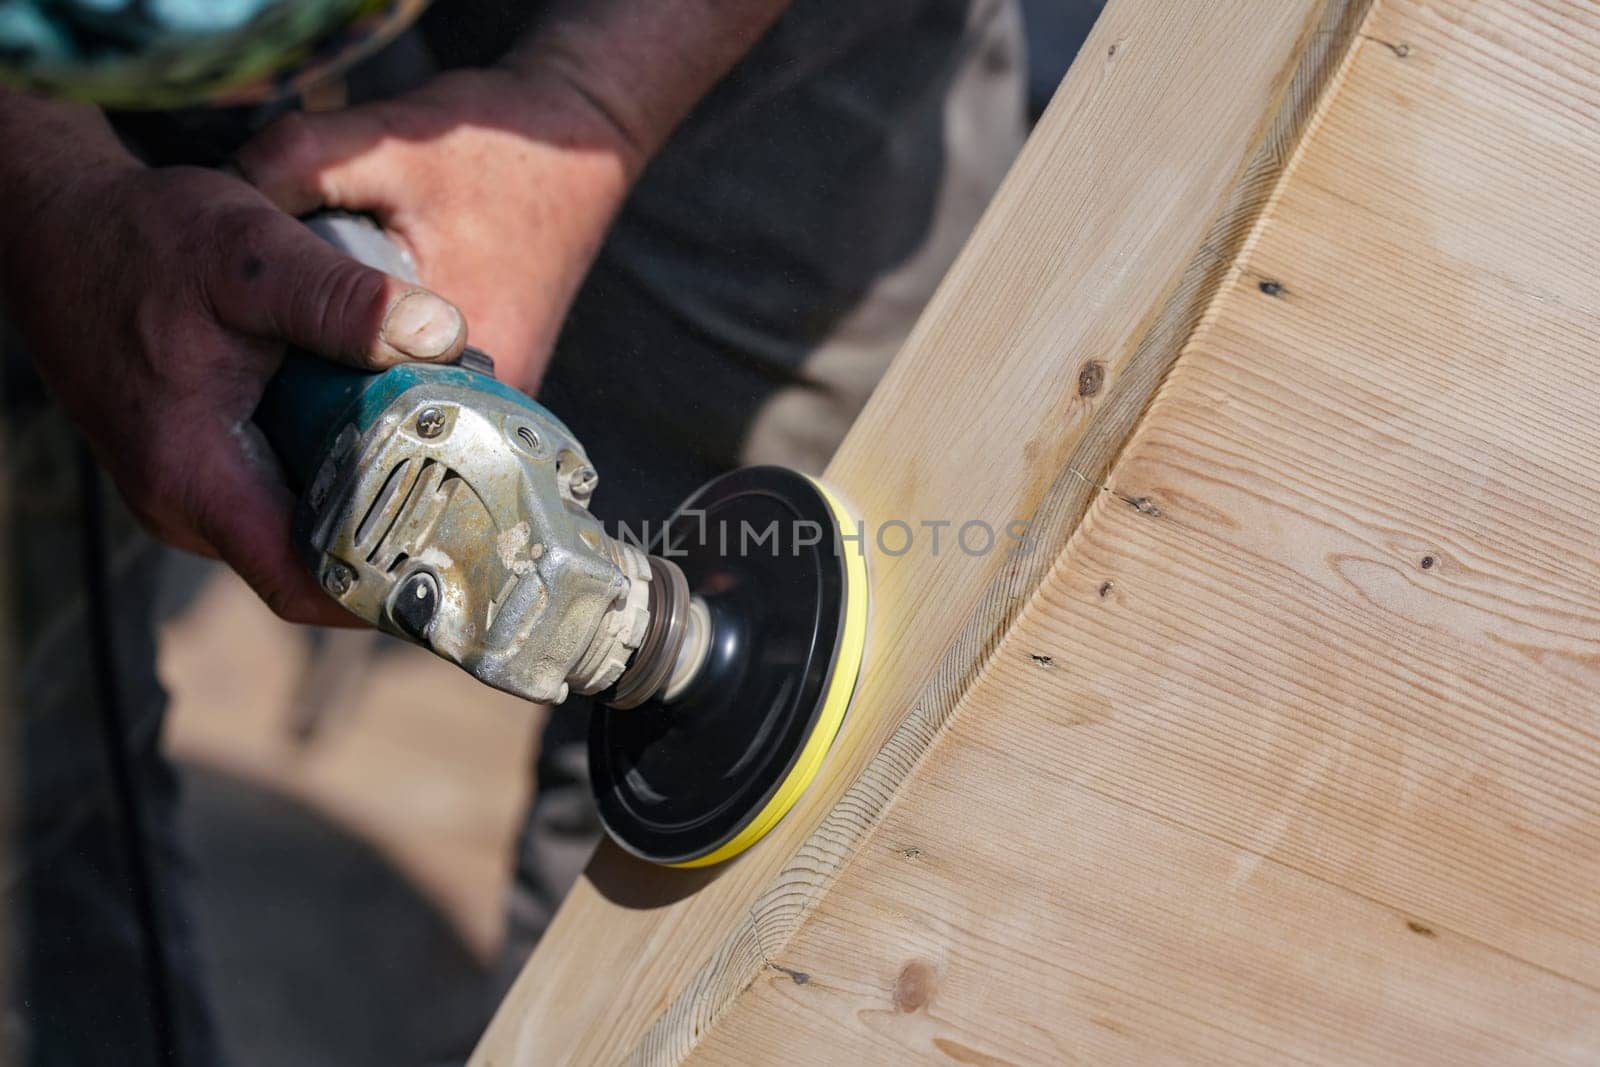 Man polishing wooden chest with old angle grinder during sunny day, closeup detail to hands without gloves by Ivanko